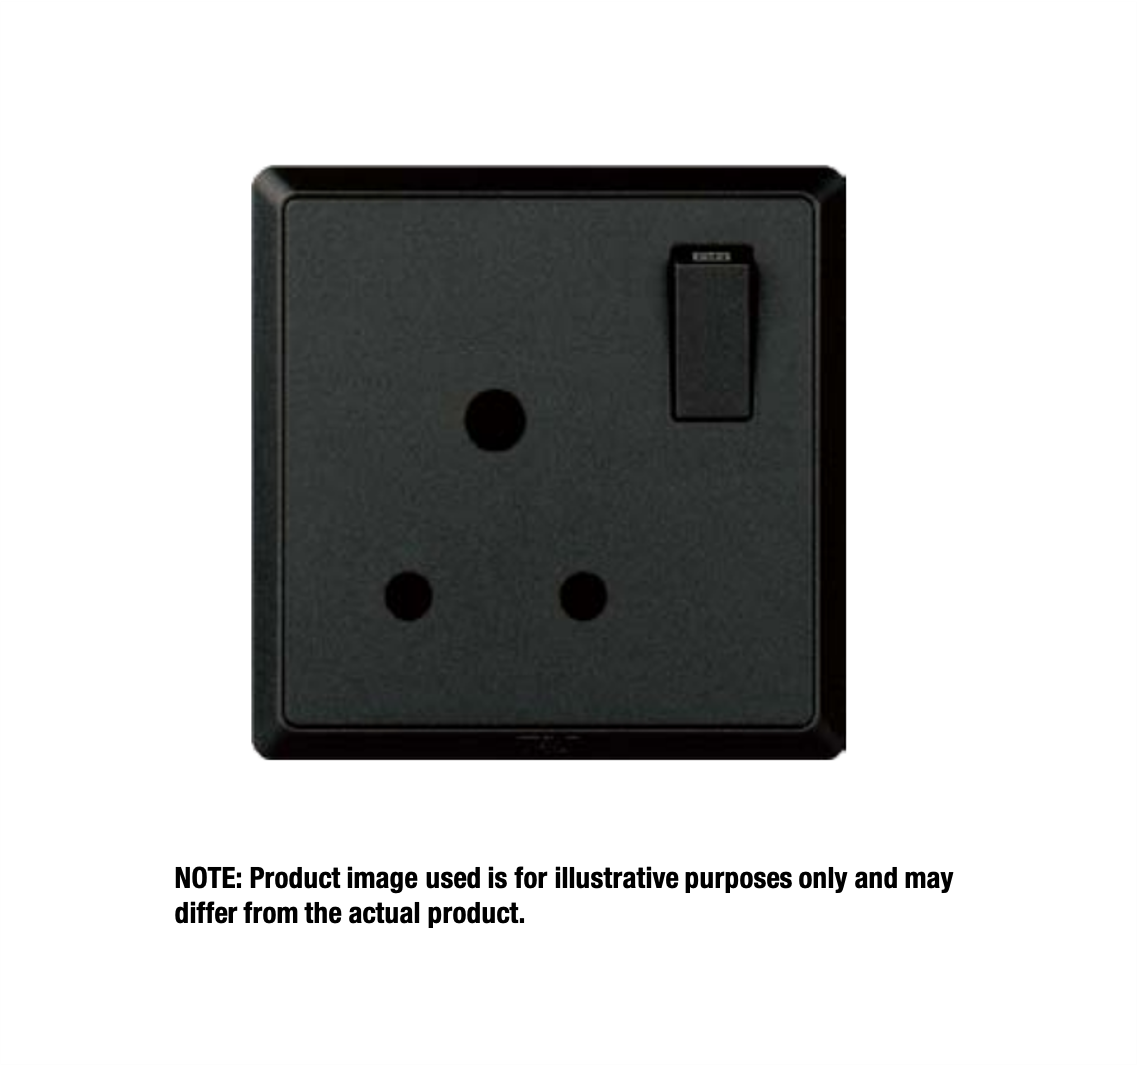 INFINIT - 1~10V 1 Gang DC Output Dimmer Only for Dimmable Electronic Ballast (Charcoal Black)